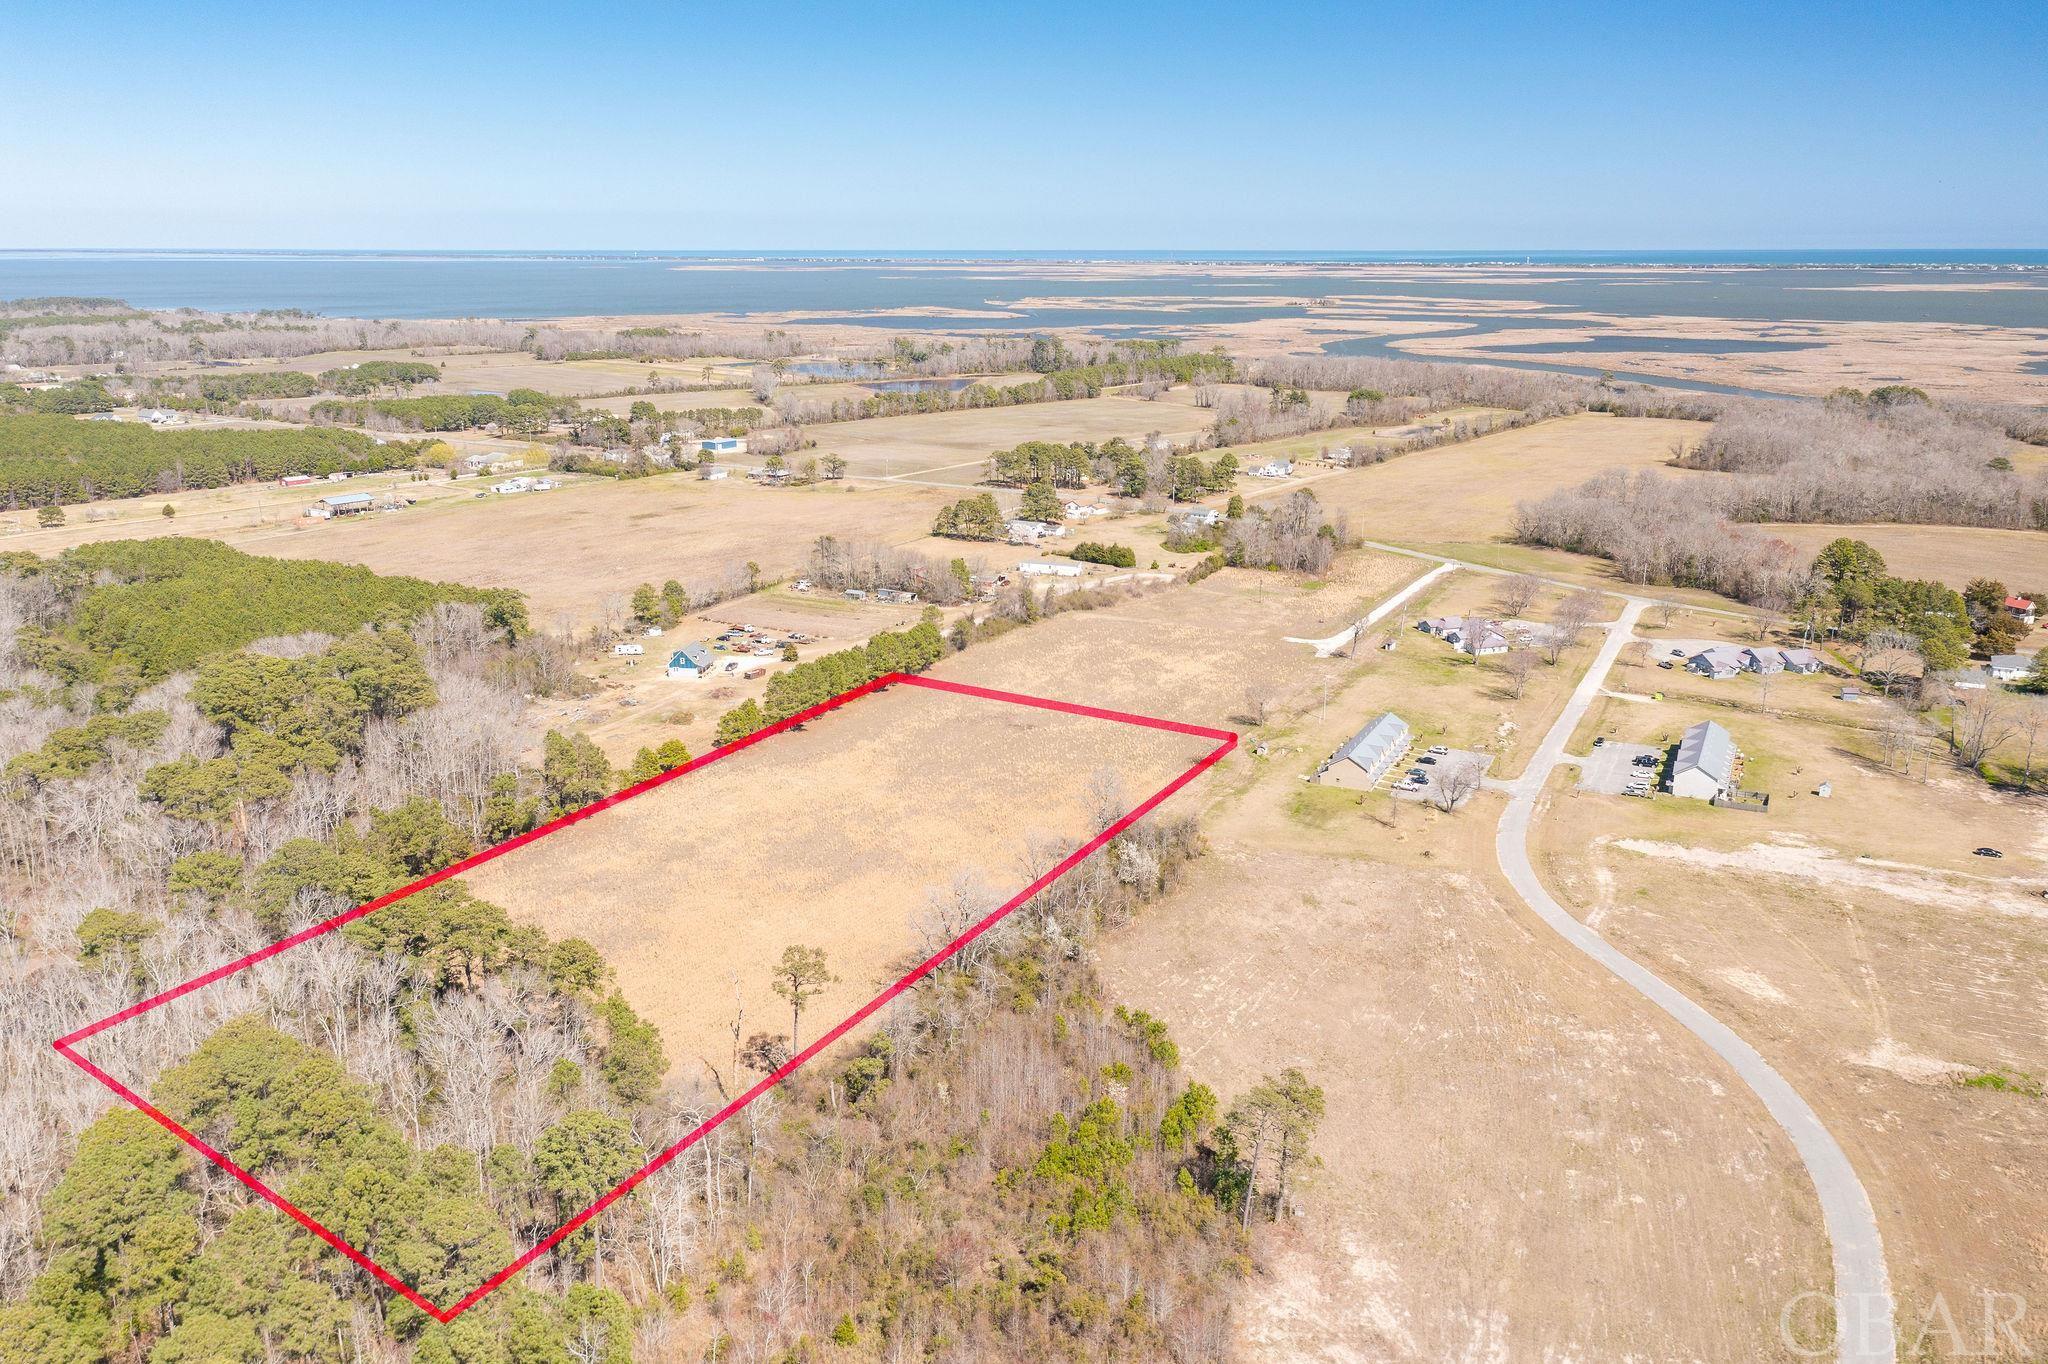 Almost 12 Acres, cleared in Lower Currituck. Looking for a spot to lay a few roots down and let them grow? Look no further. With  acres to spread out, this space has so many possibilities. With no HOA and no HOA fees (or HOA restrictions), you have the freedom to make this property your own private oasis. Centrally located within Currituck yet just a very short drive to the Outer Banks. Grocery shopping is located within miles but you can still enjoy a slower paced lifestyle on the backroads.